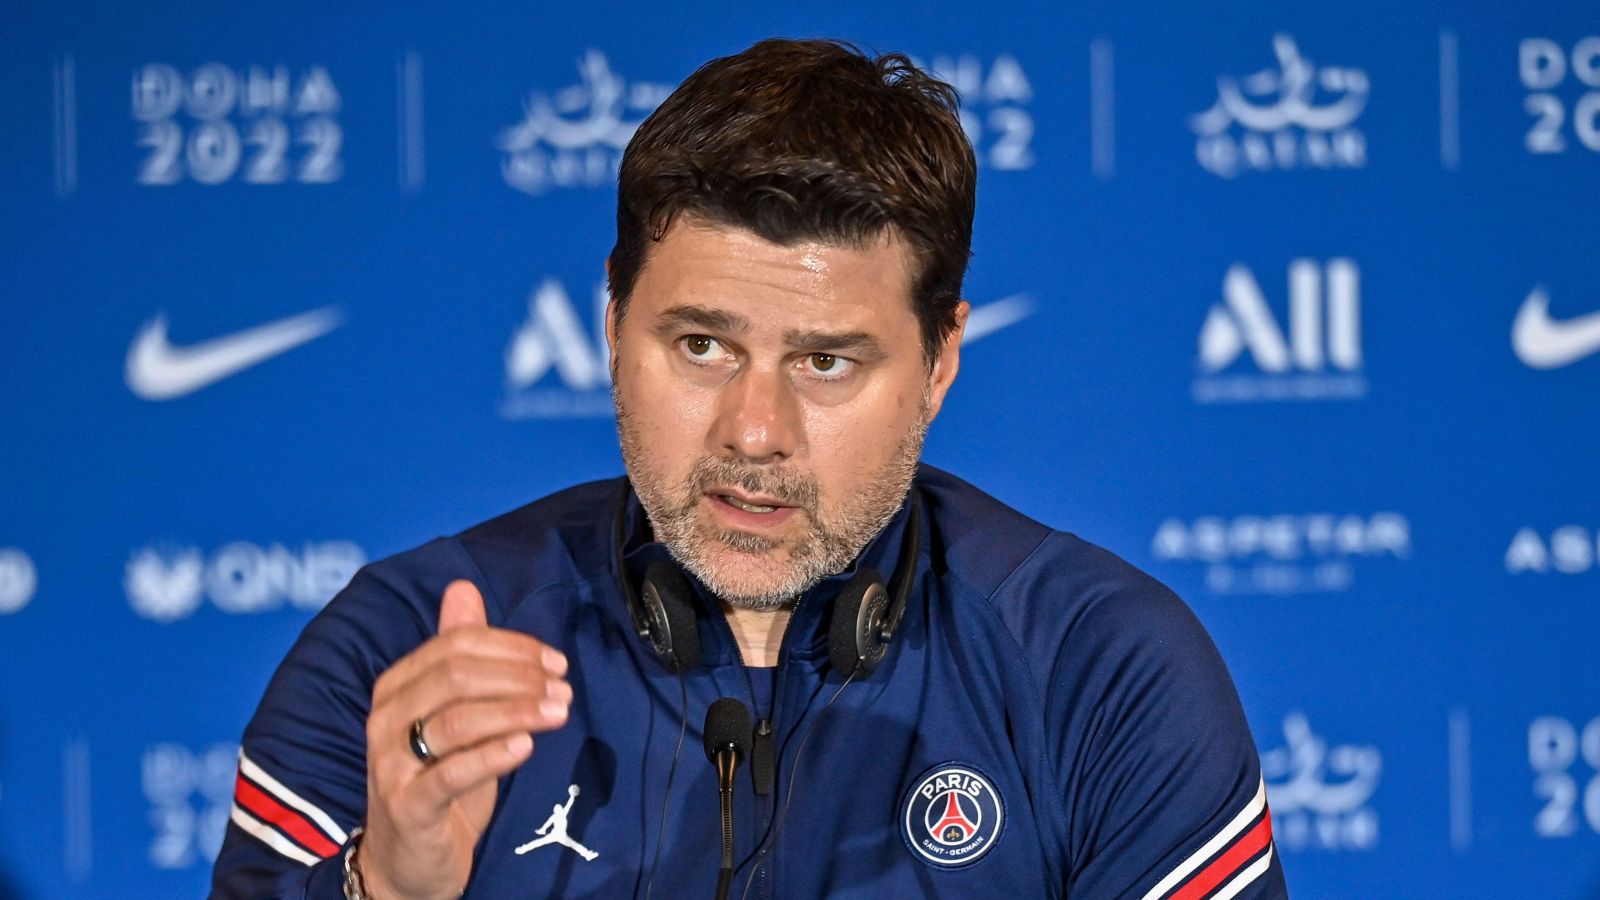 Pochettino calls for the “reunification” of Chelsea with the goal of Man Utd;  ‘wants agreement agreed’ immediately